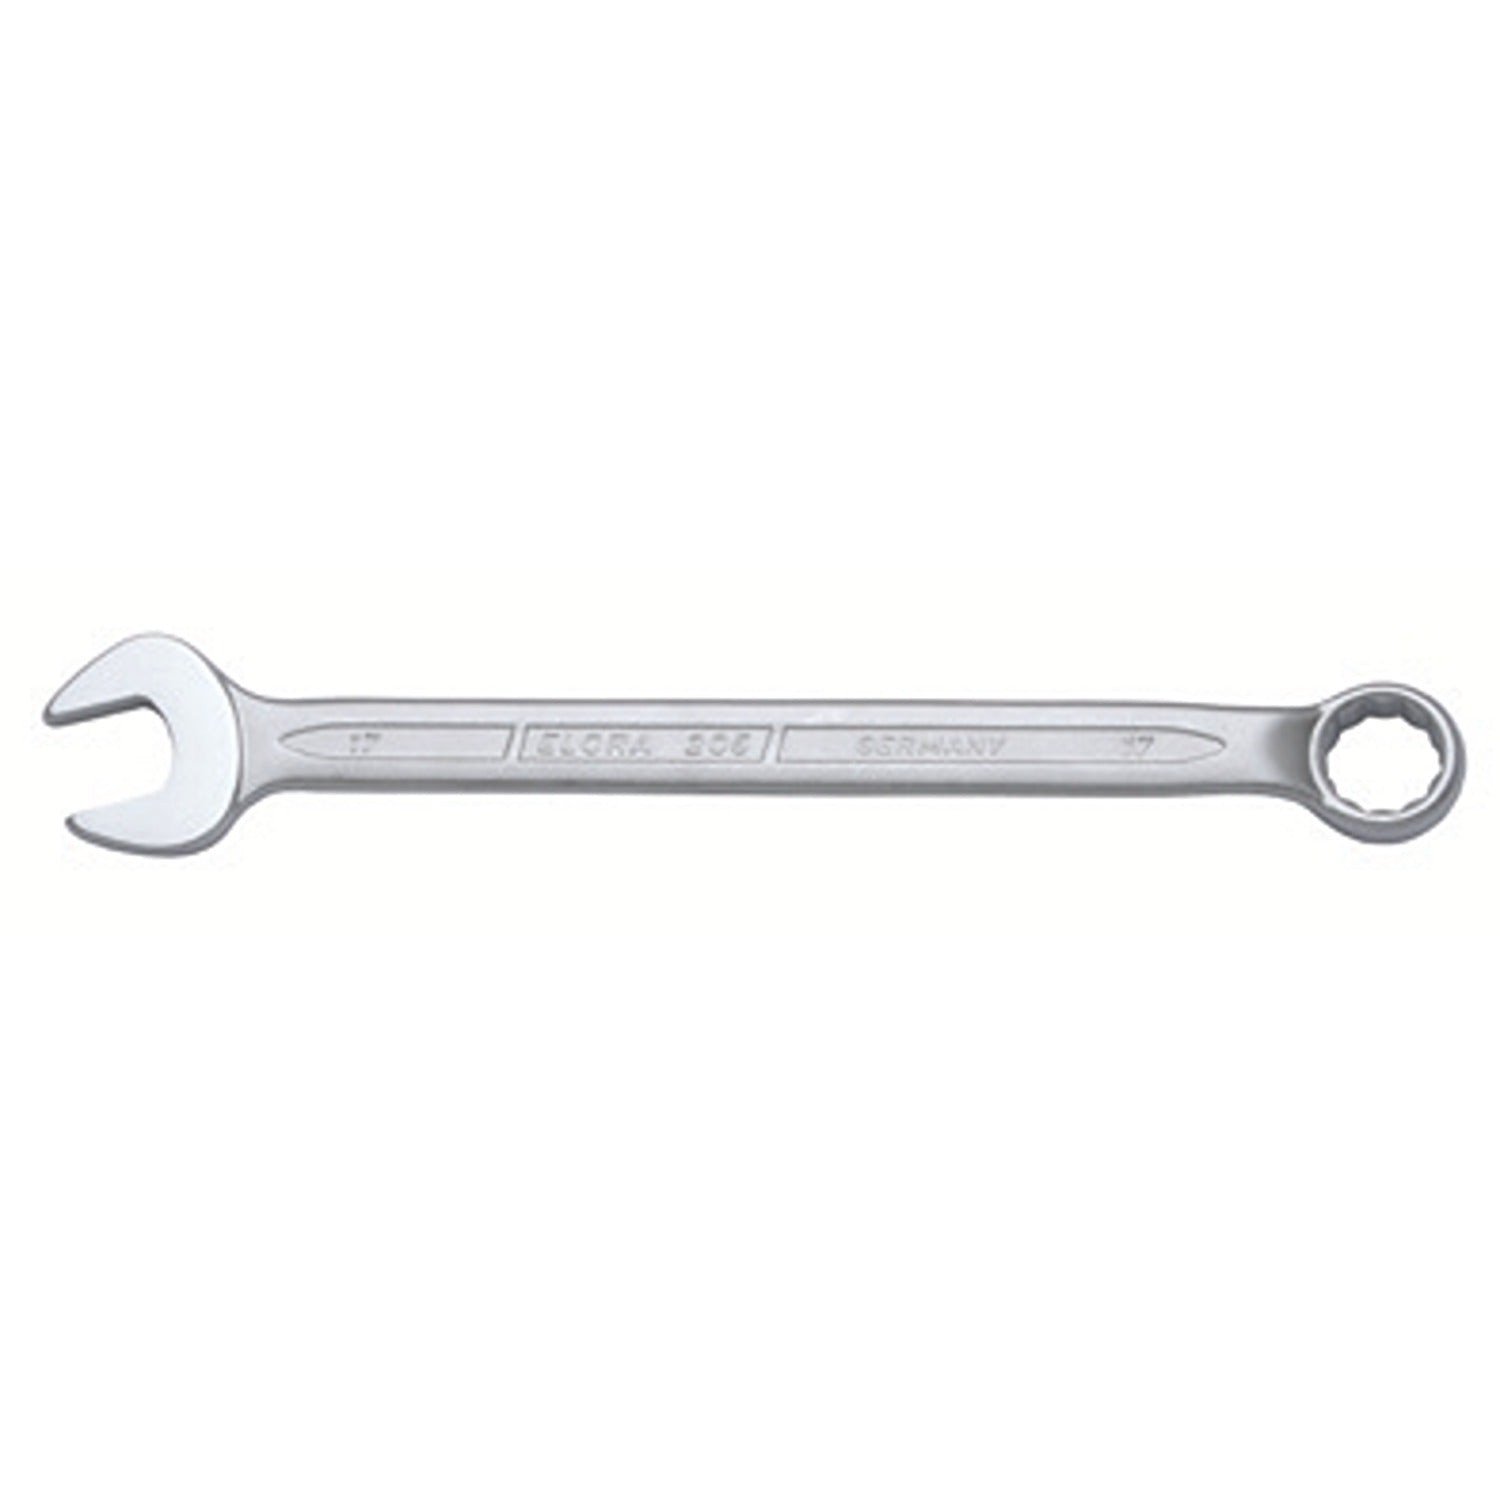 ELORA 203A Combination Spanner Inches (ELORA Tools) - Premium Combination Spanner from ELORA - Shop now at Yew Aik.